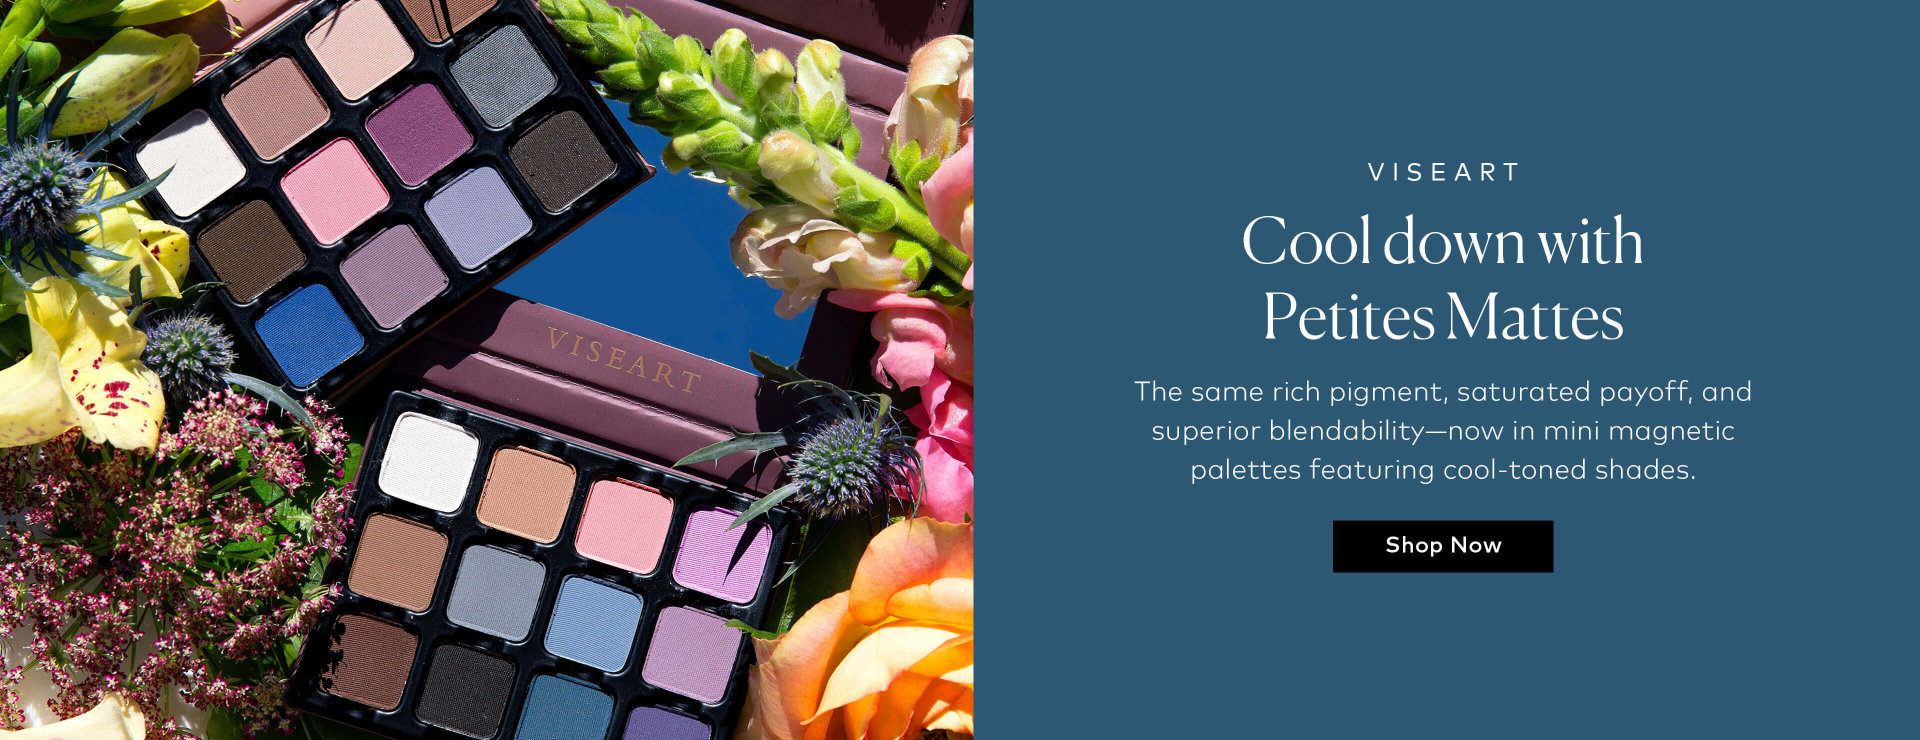 Shop the Viseart Petites Mattes in Cool and Cool Original on Beautylish.com! 